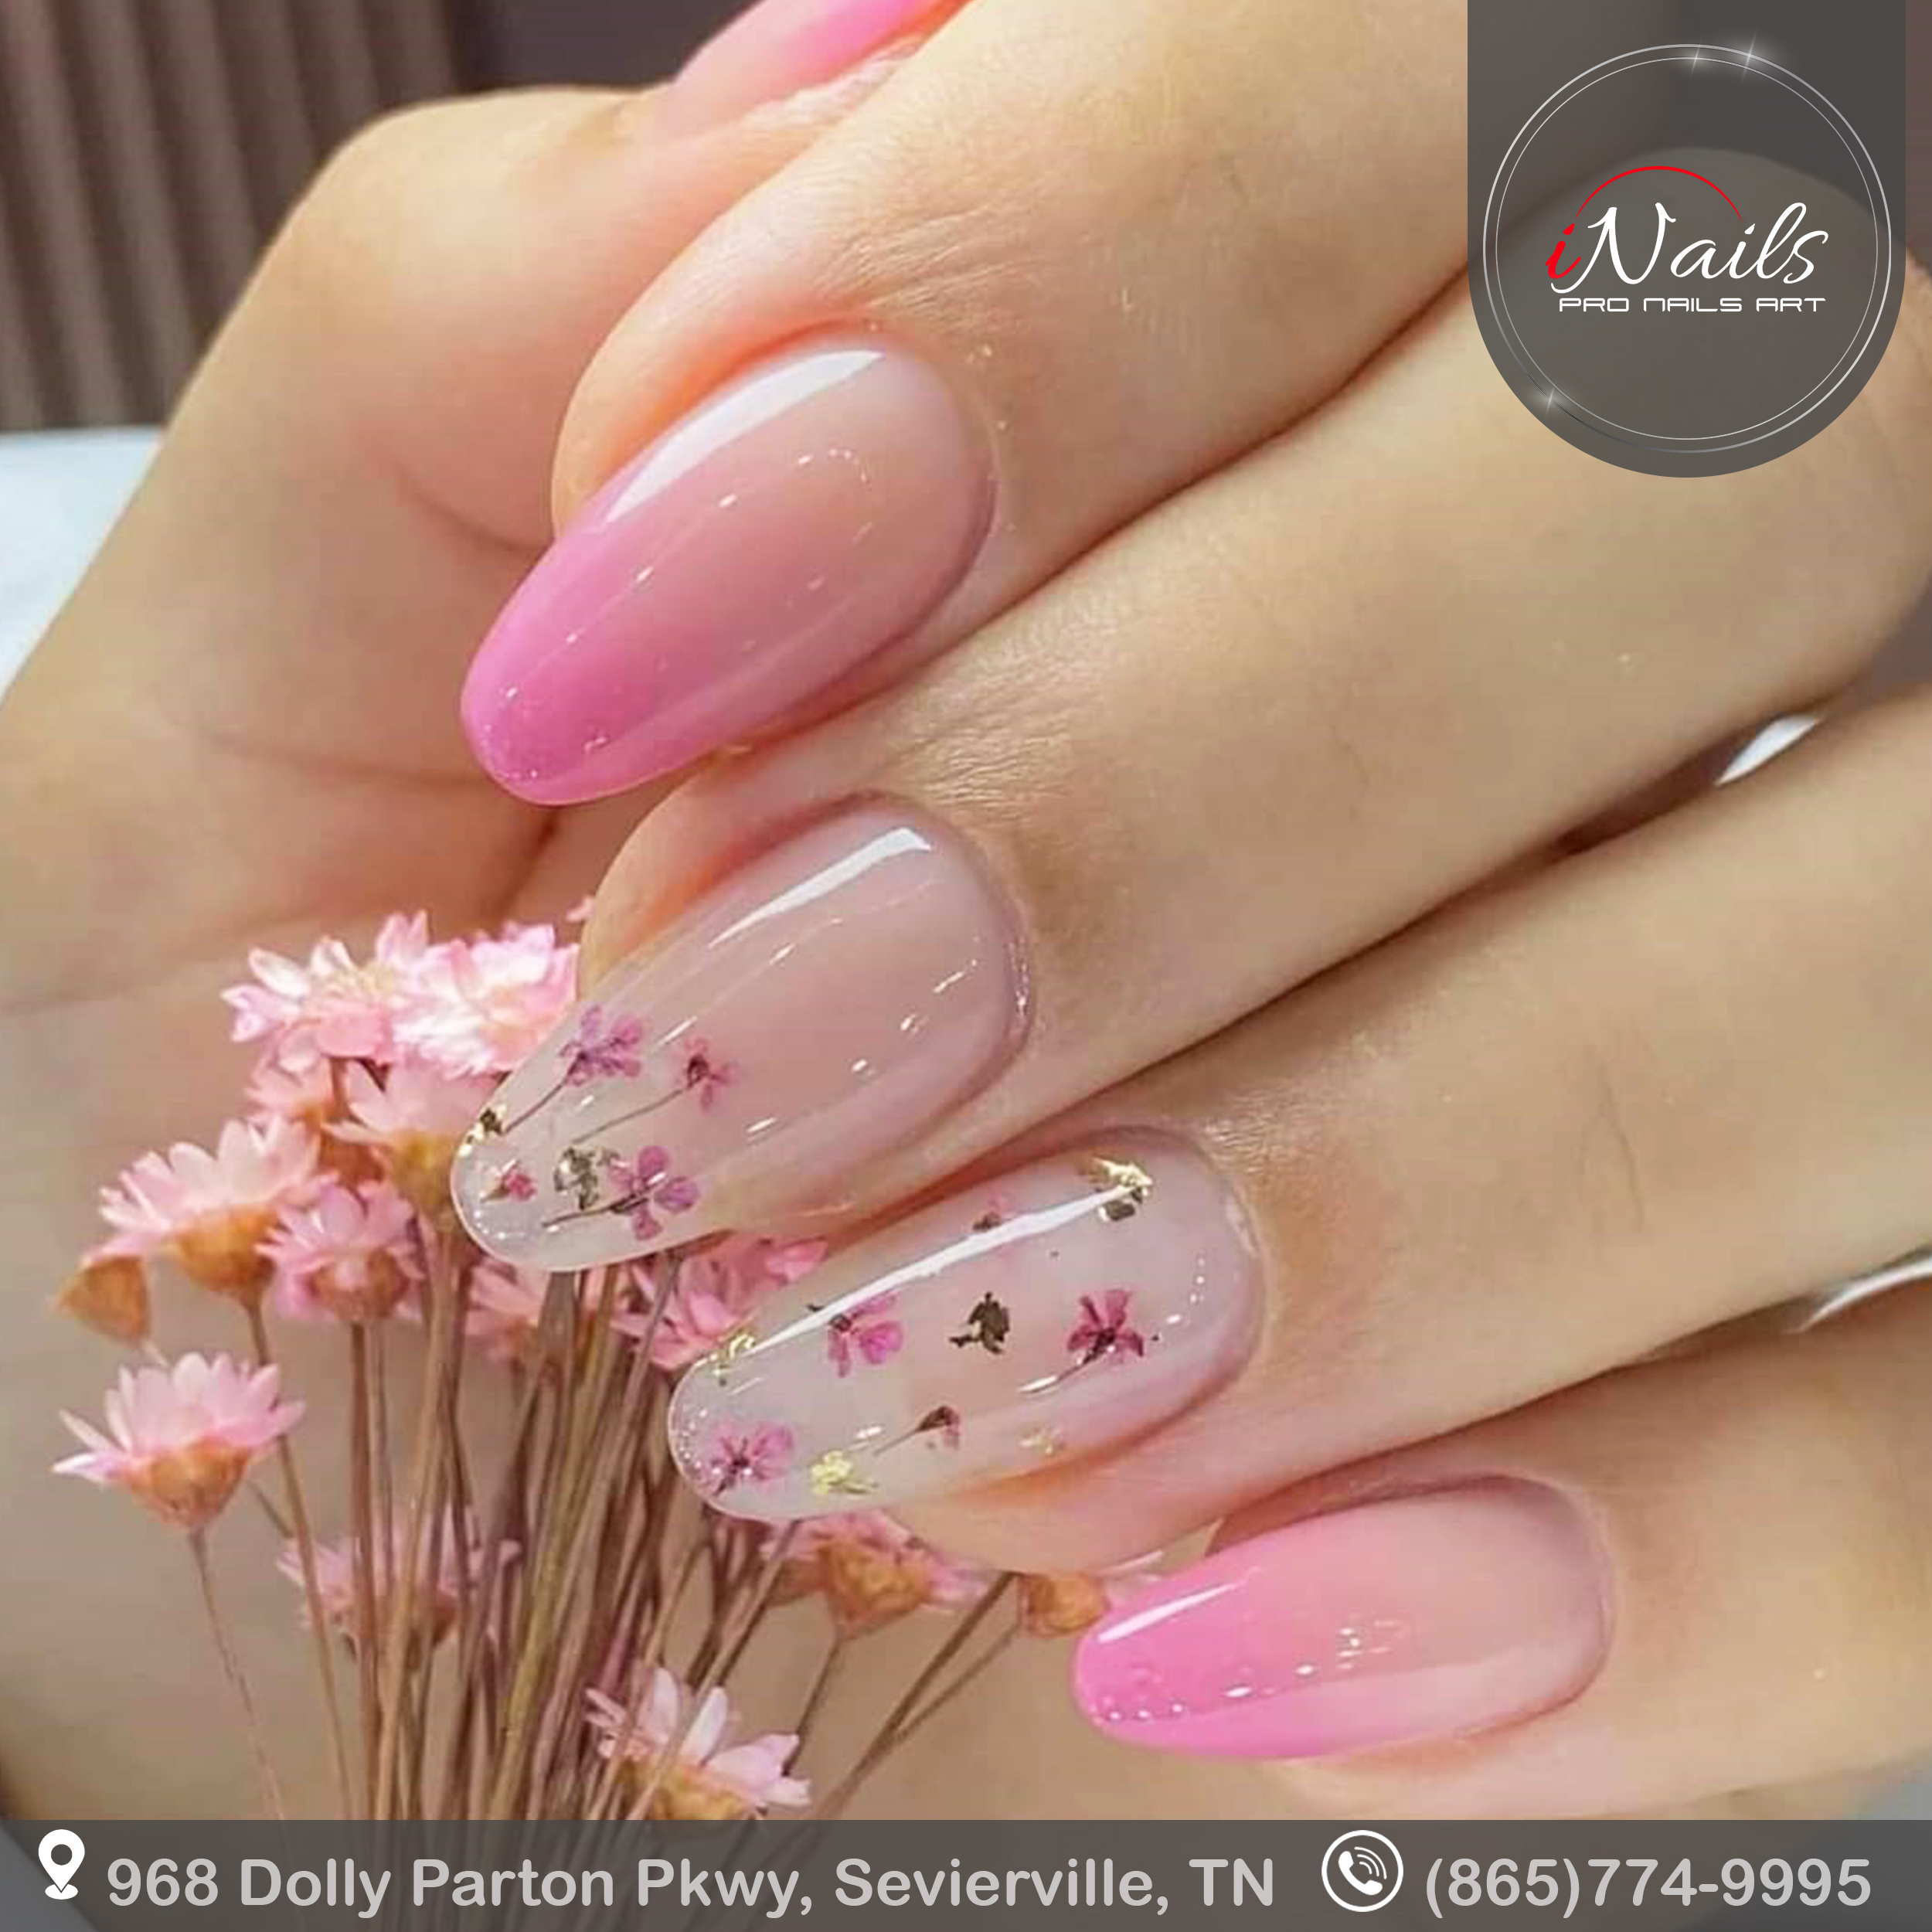 Spring nails inails Sevierville jhsd3dlfds